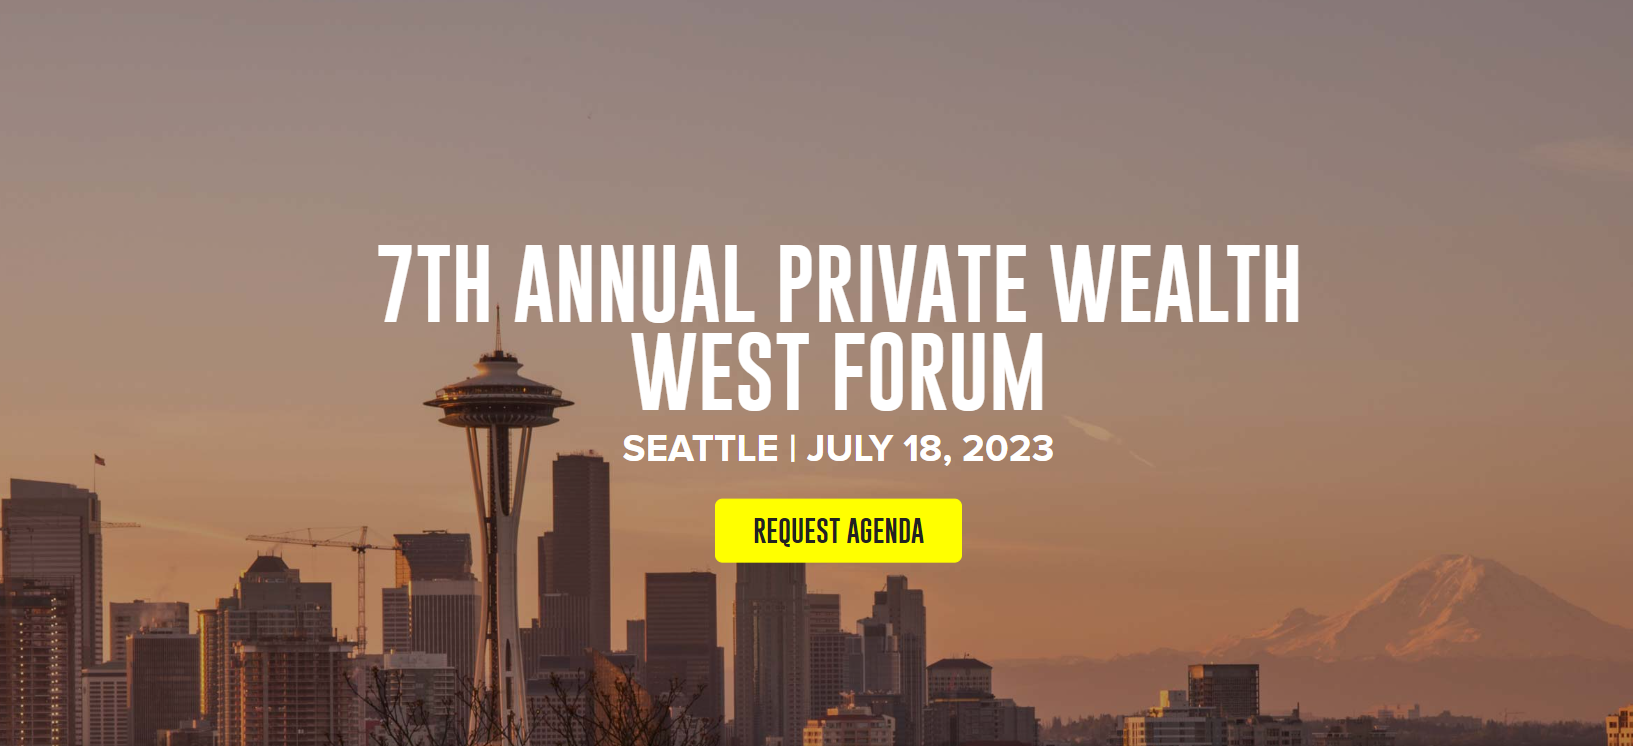 7th Annual Private Wealth West Forum